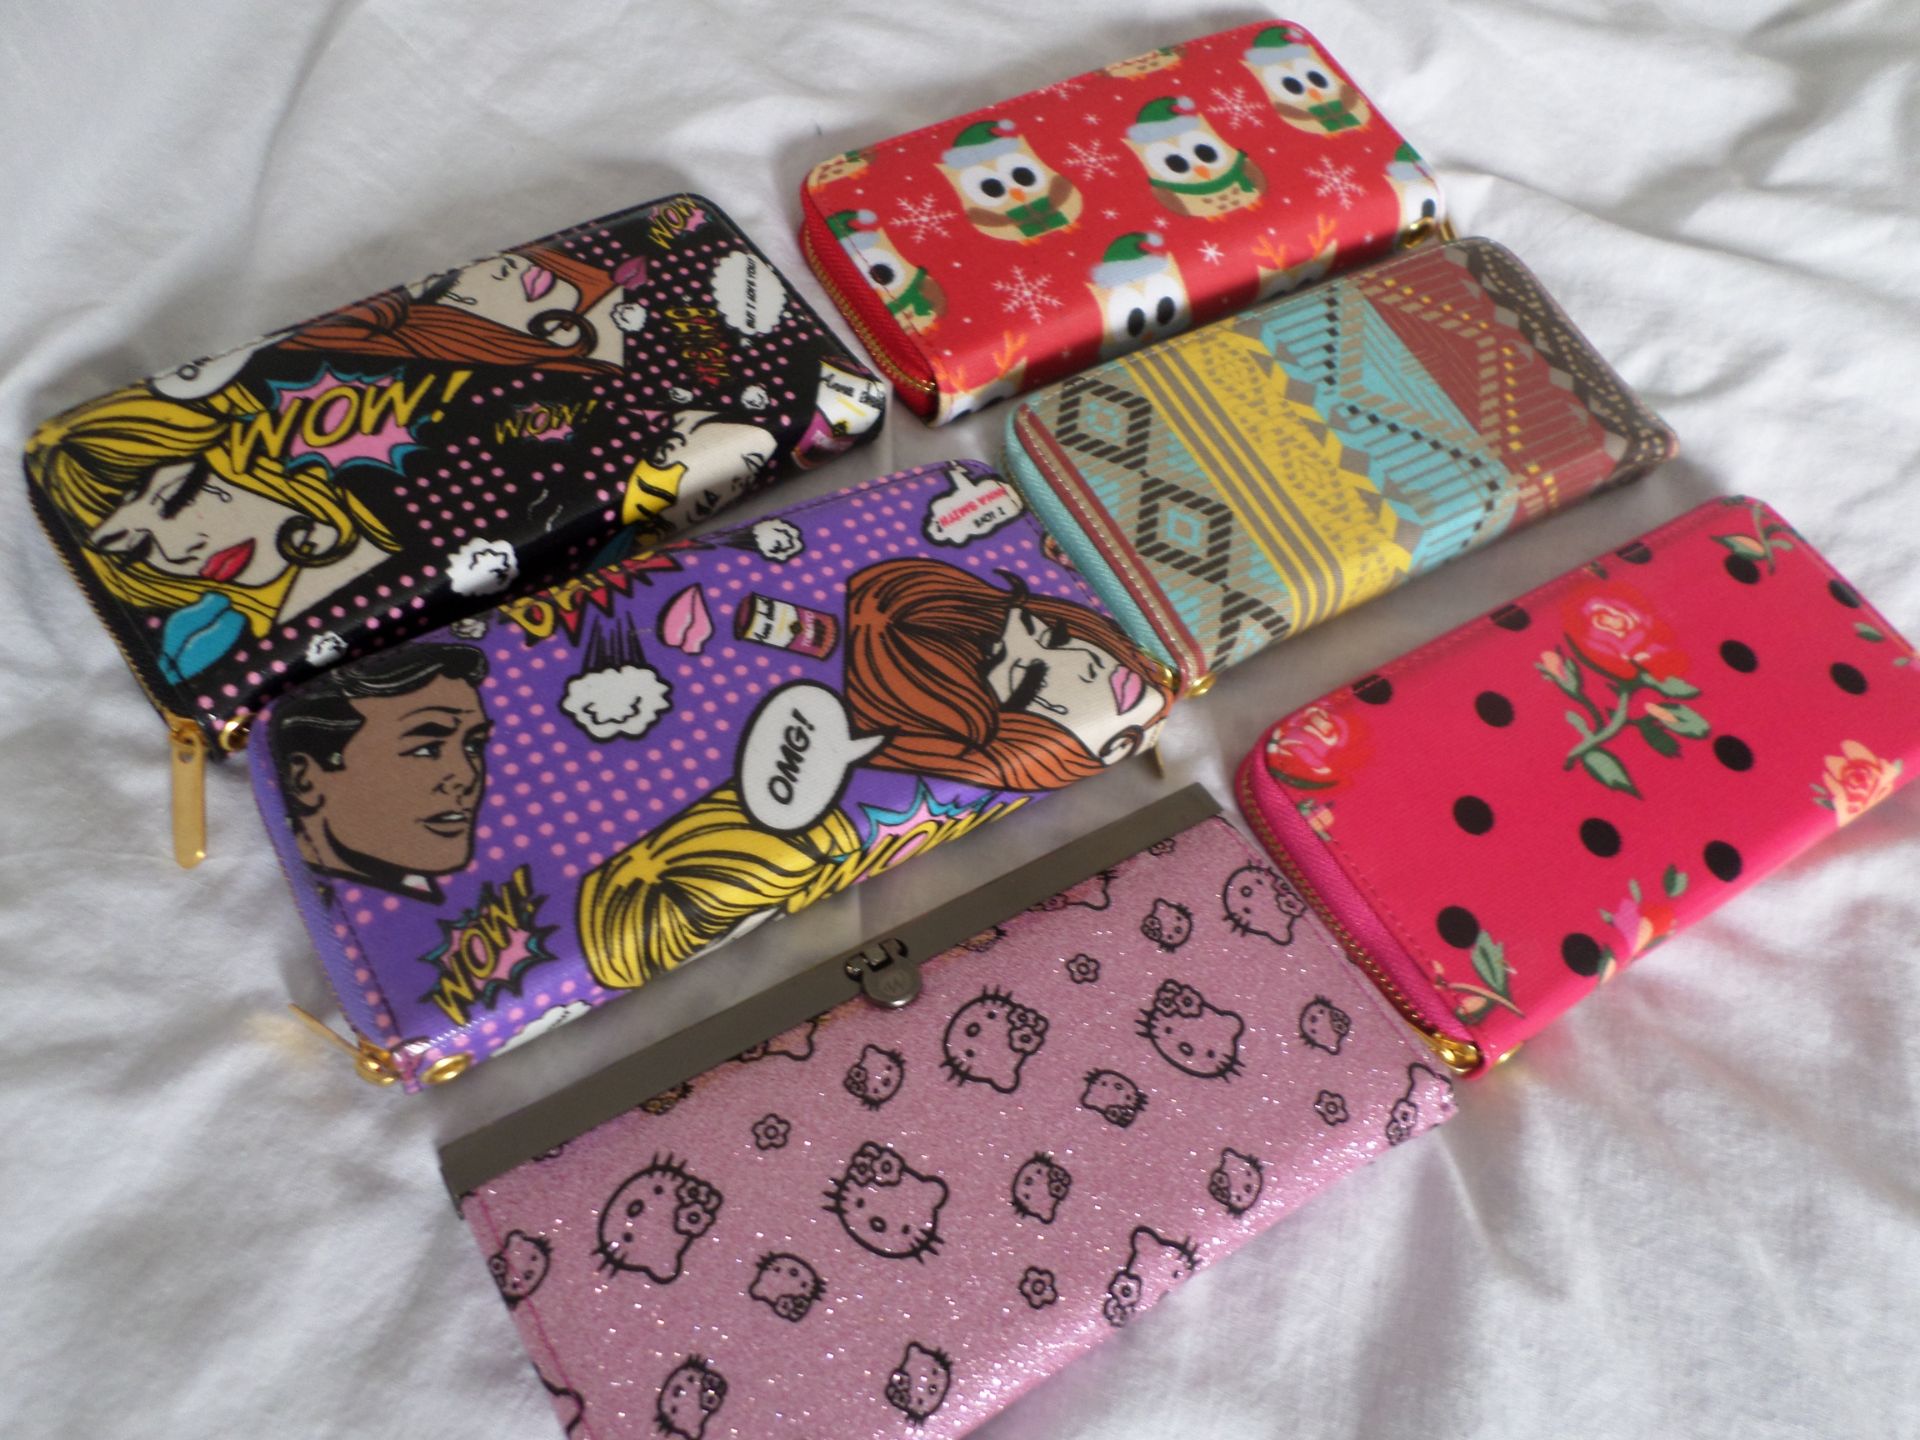 20 x Ladies Clutch/Purses RRP £14 Each. Brand New - Image 3 of 5